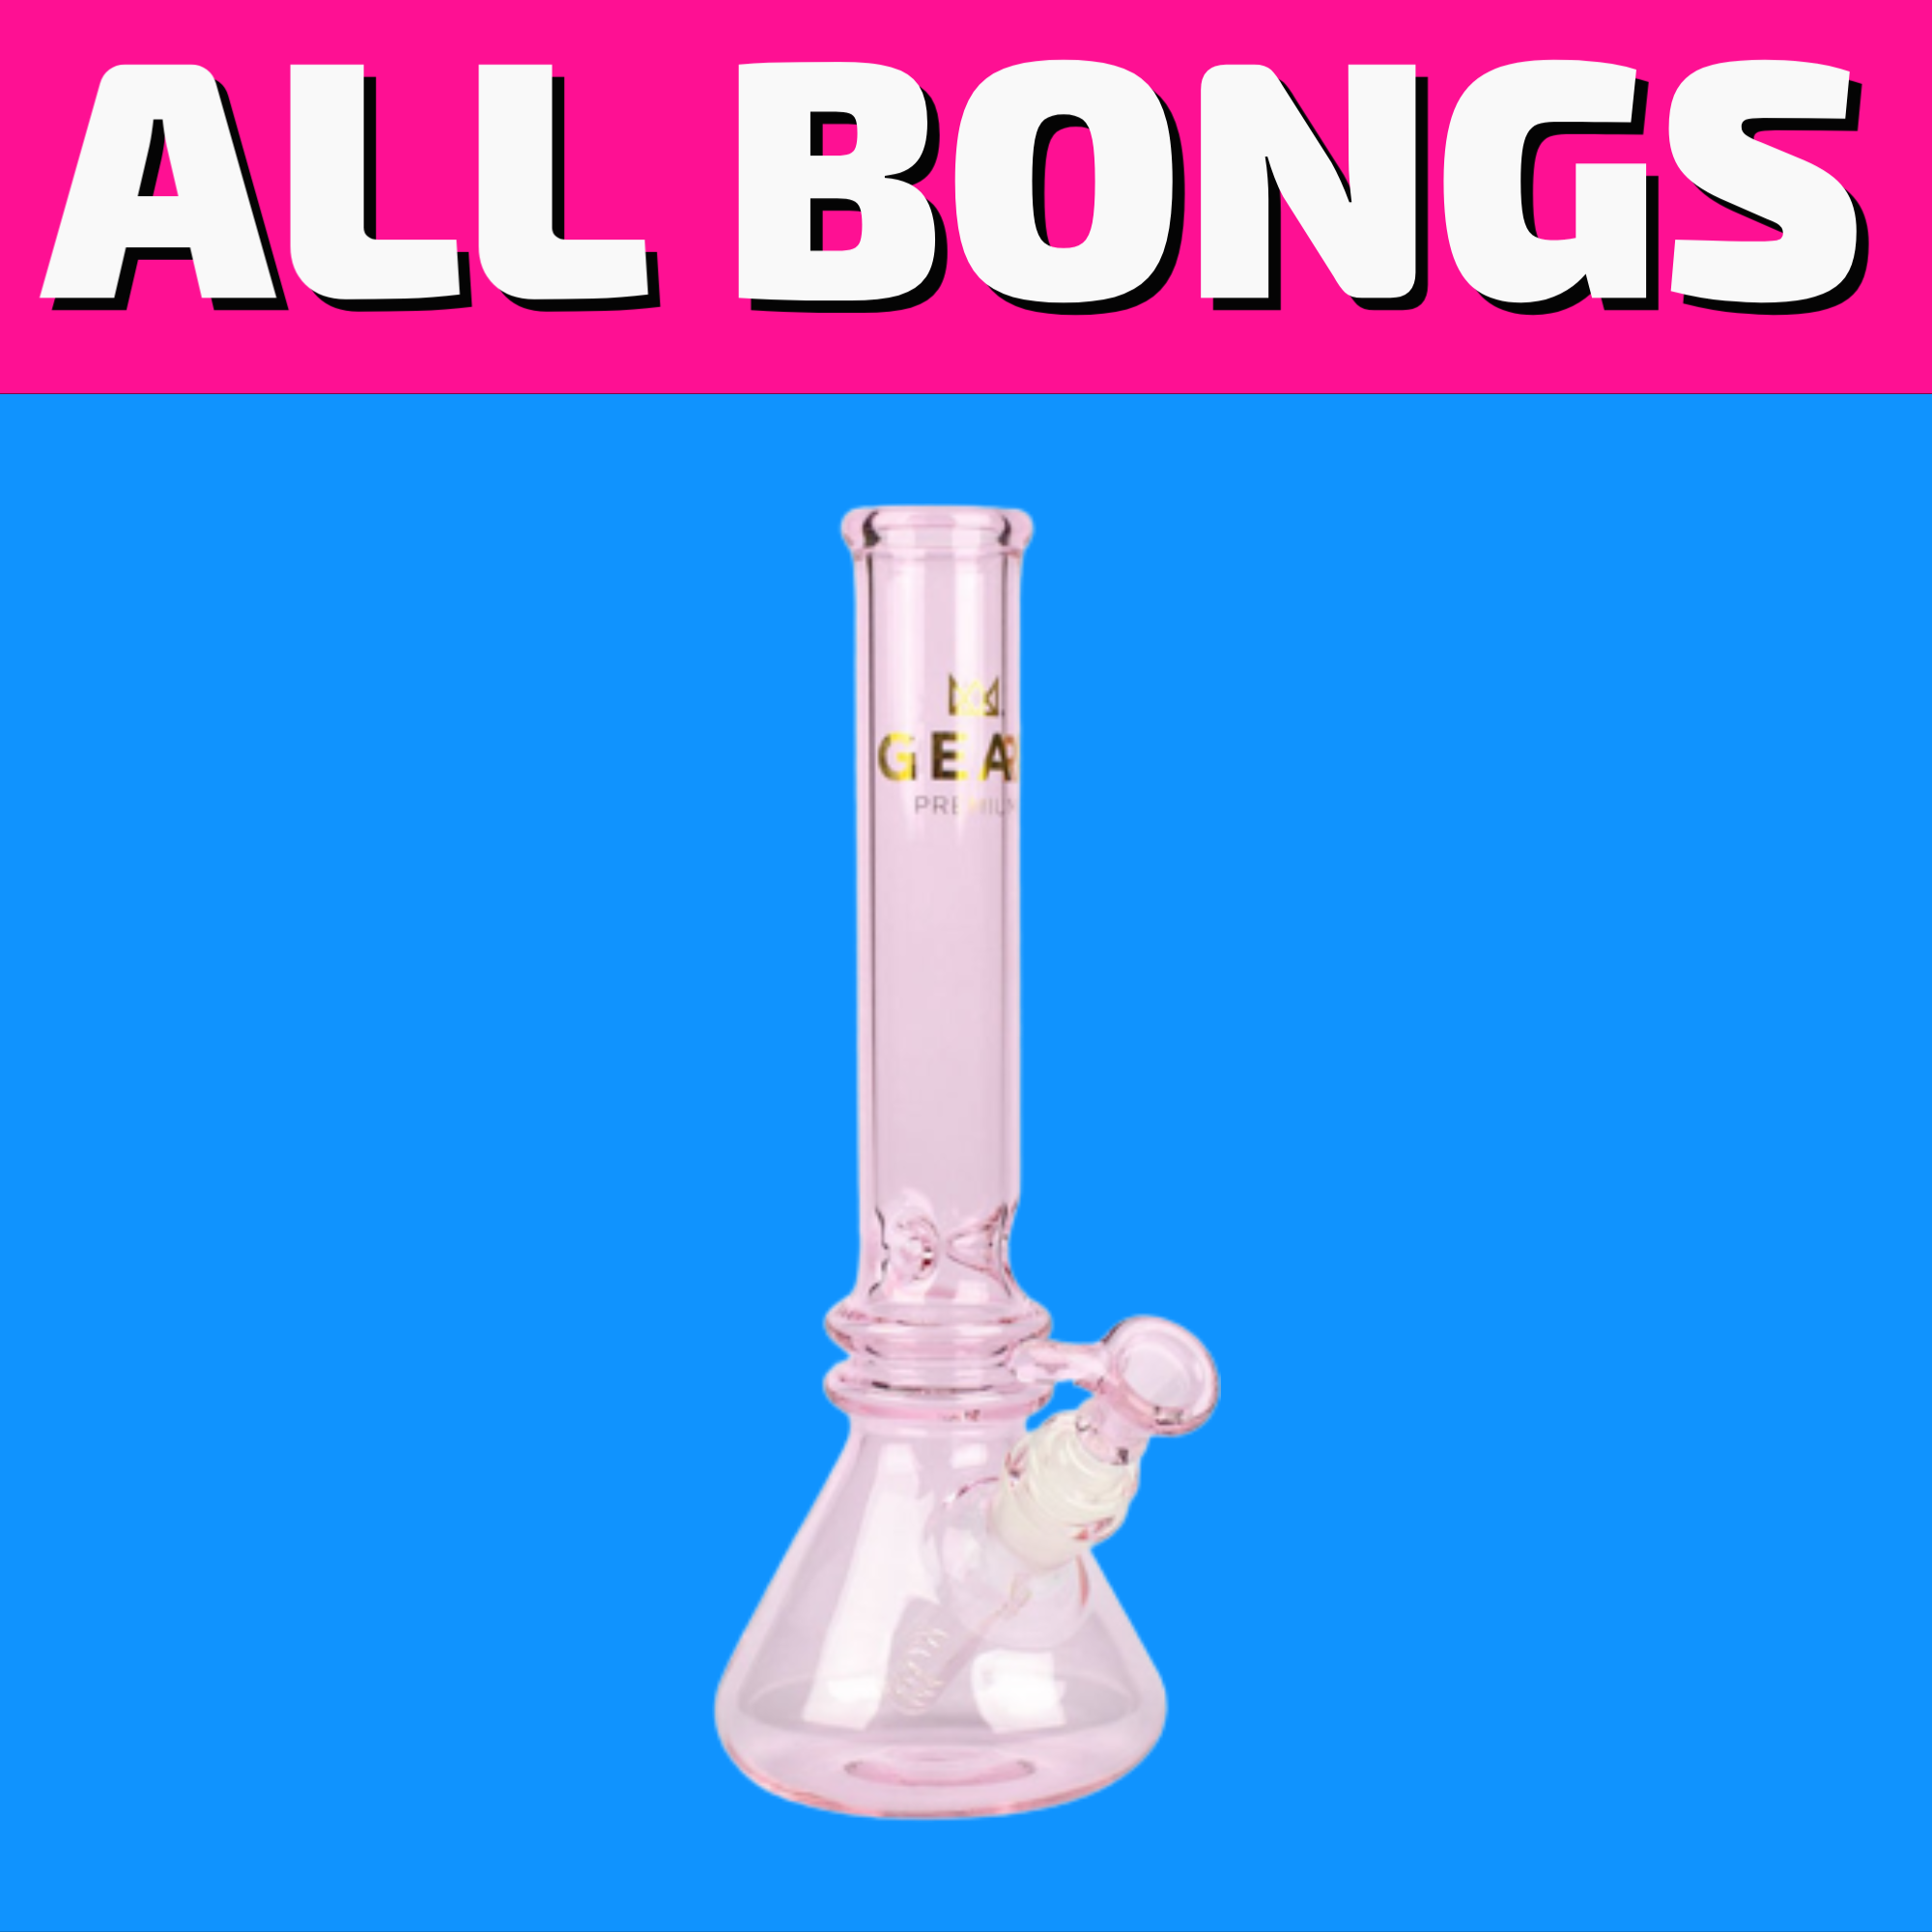 Shop Winnipeg's best selection of bongs, water pipes cannabis products, and edibles for same day delivery or buy them in-store.